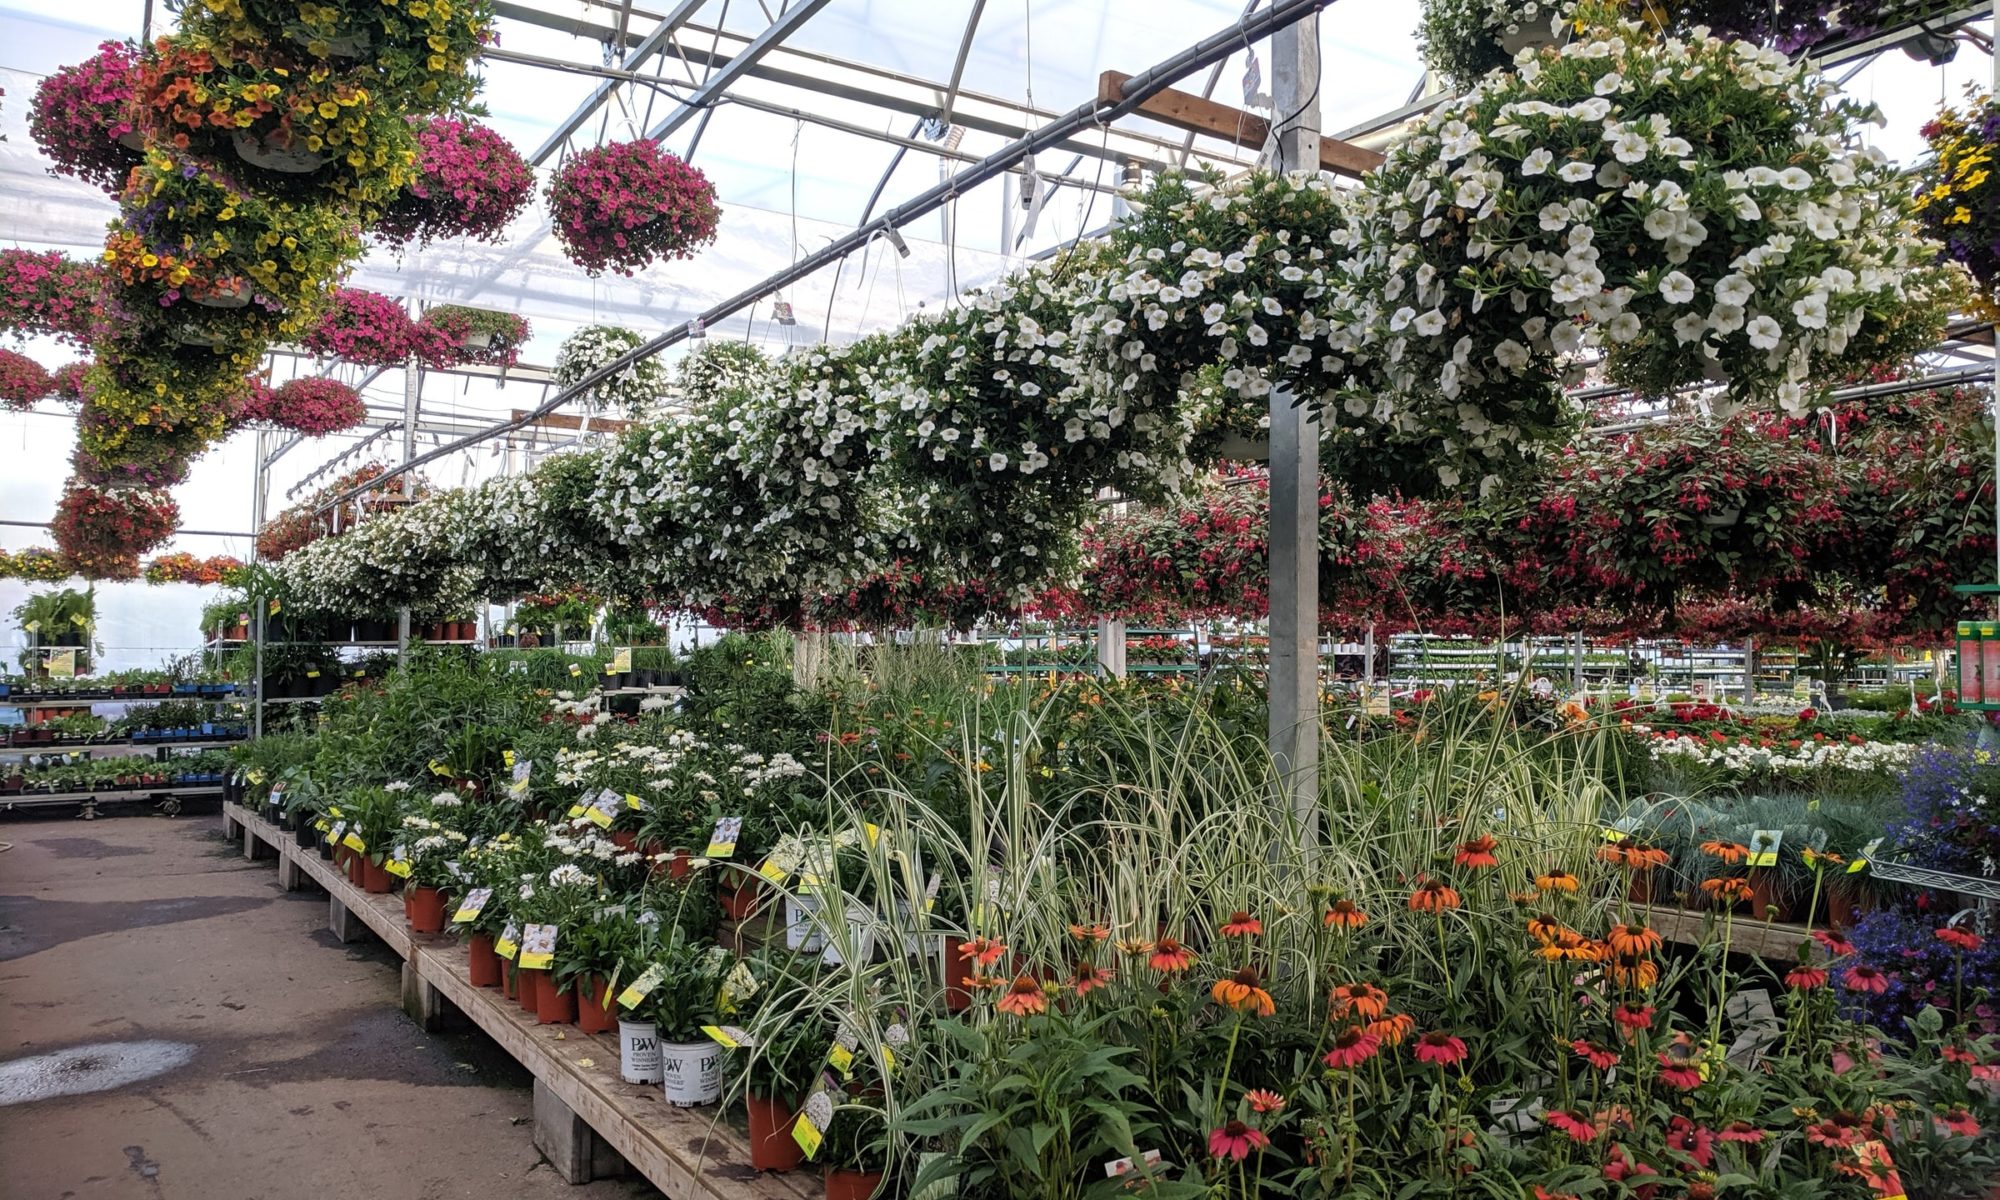 Hanging baskets and bedding plants in greenhouse